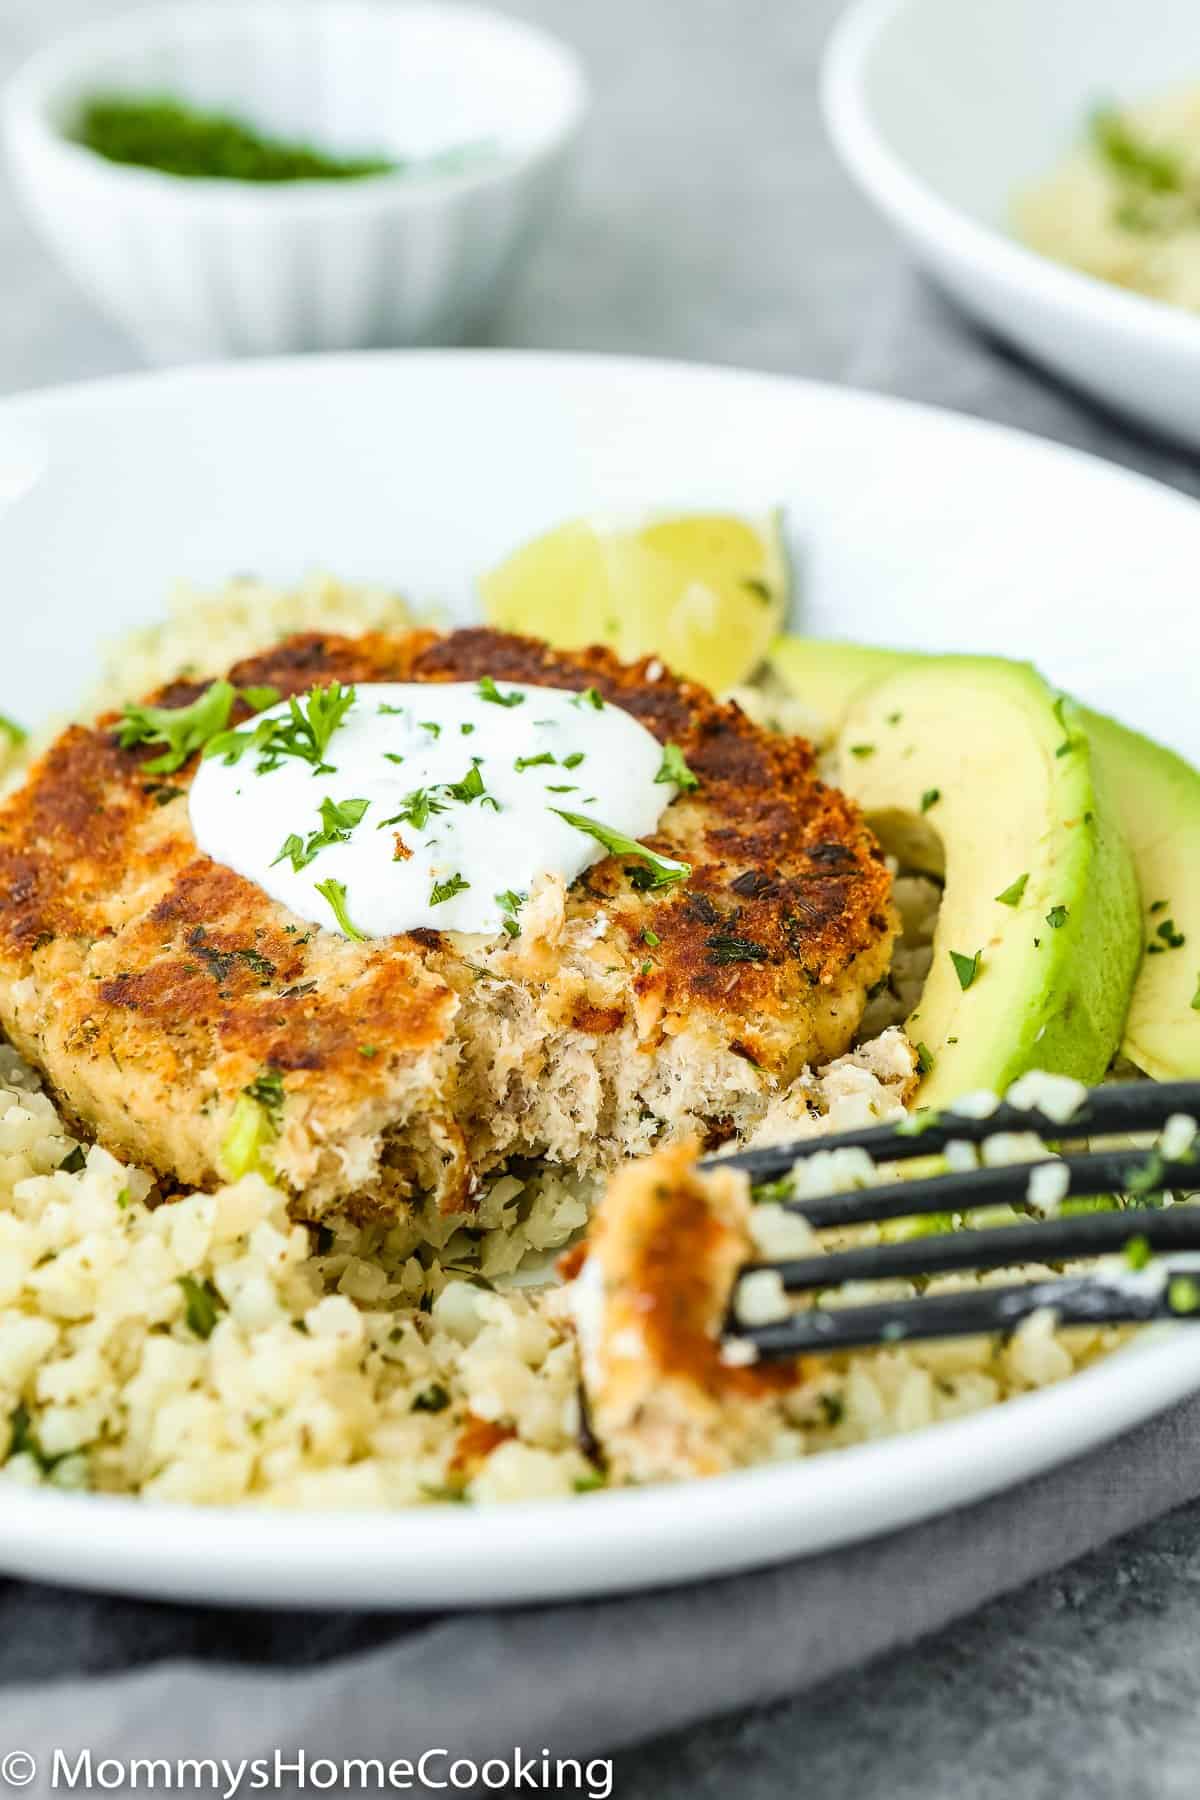 Plate with Eggless Salmon Patties, Cauliflower rice and avocado and a fork